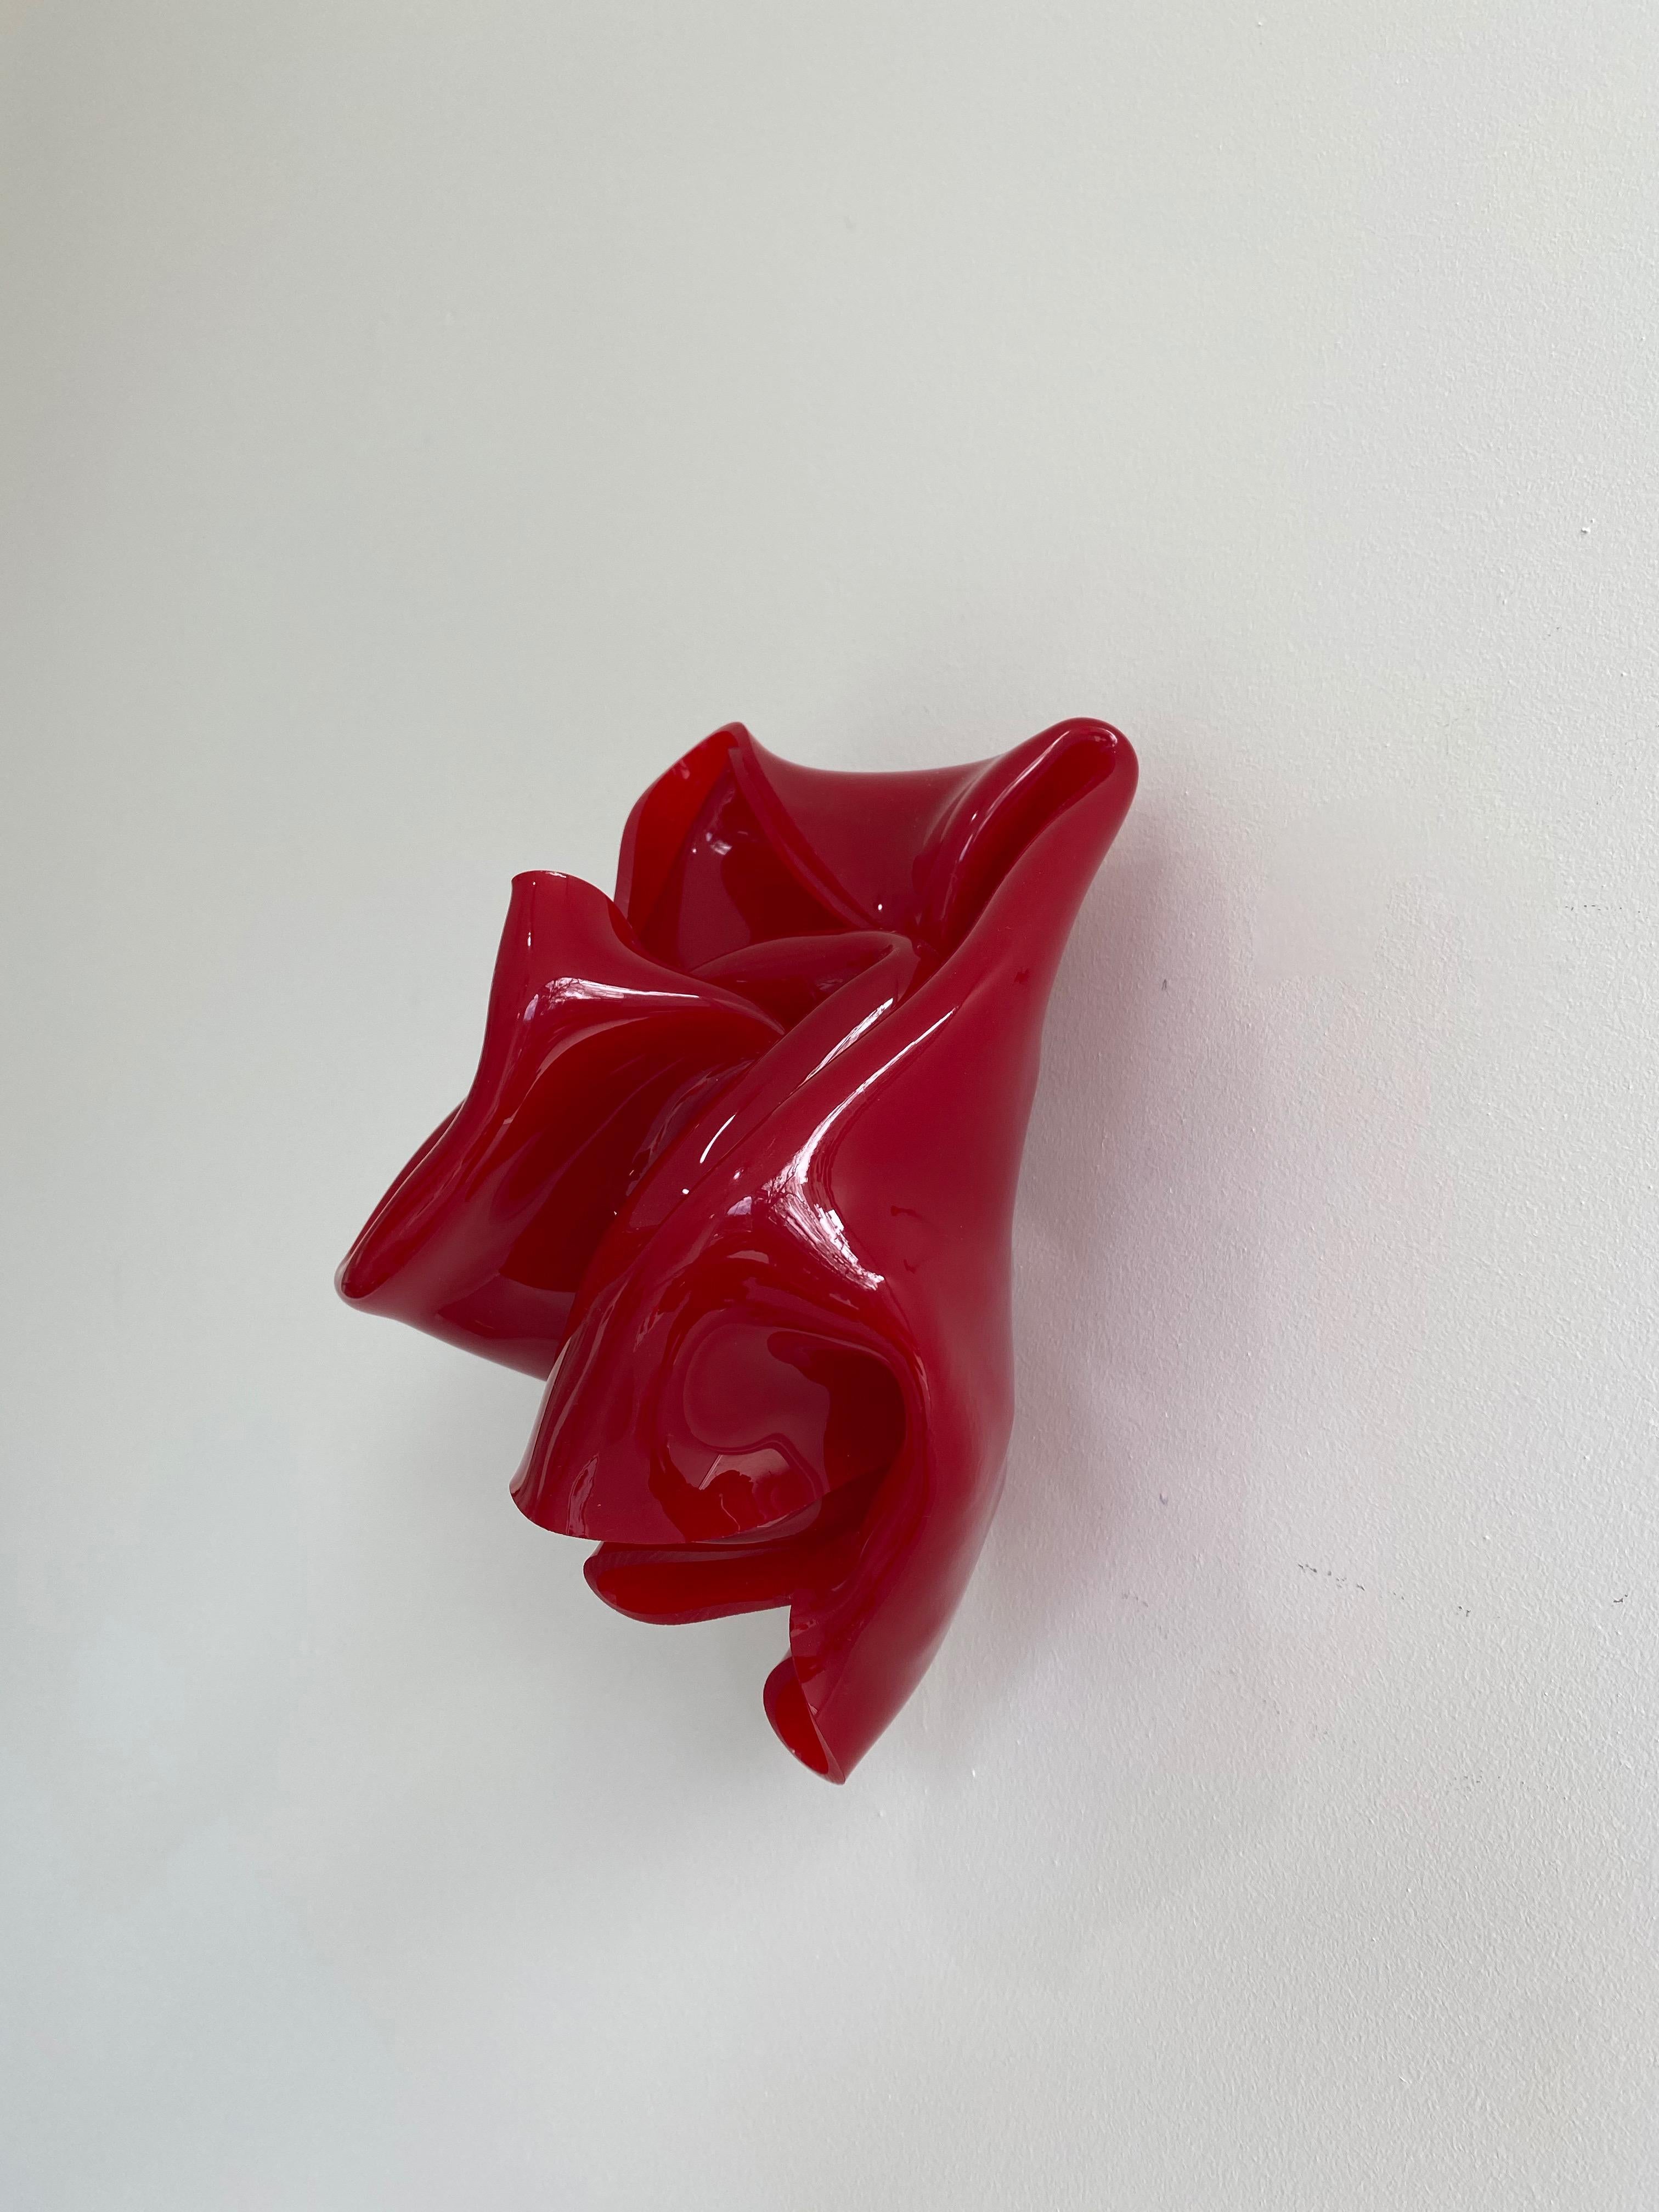 'Red Squash', Colourful contemporary abstract wall sculpture - Sculpture by Anya Pesce